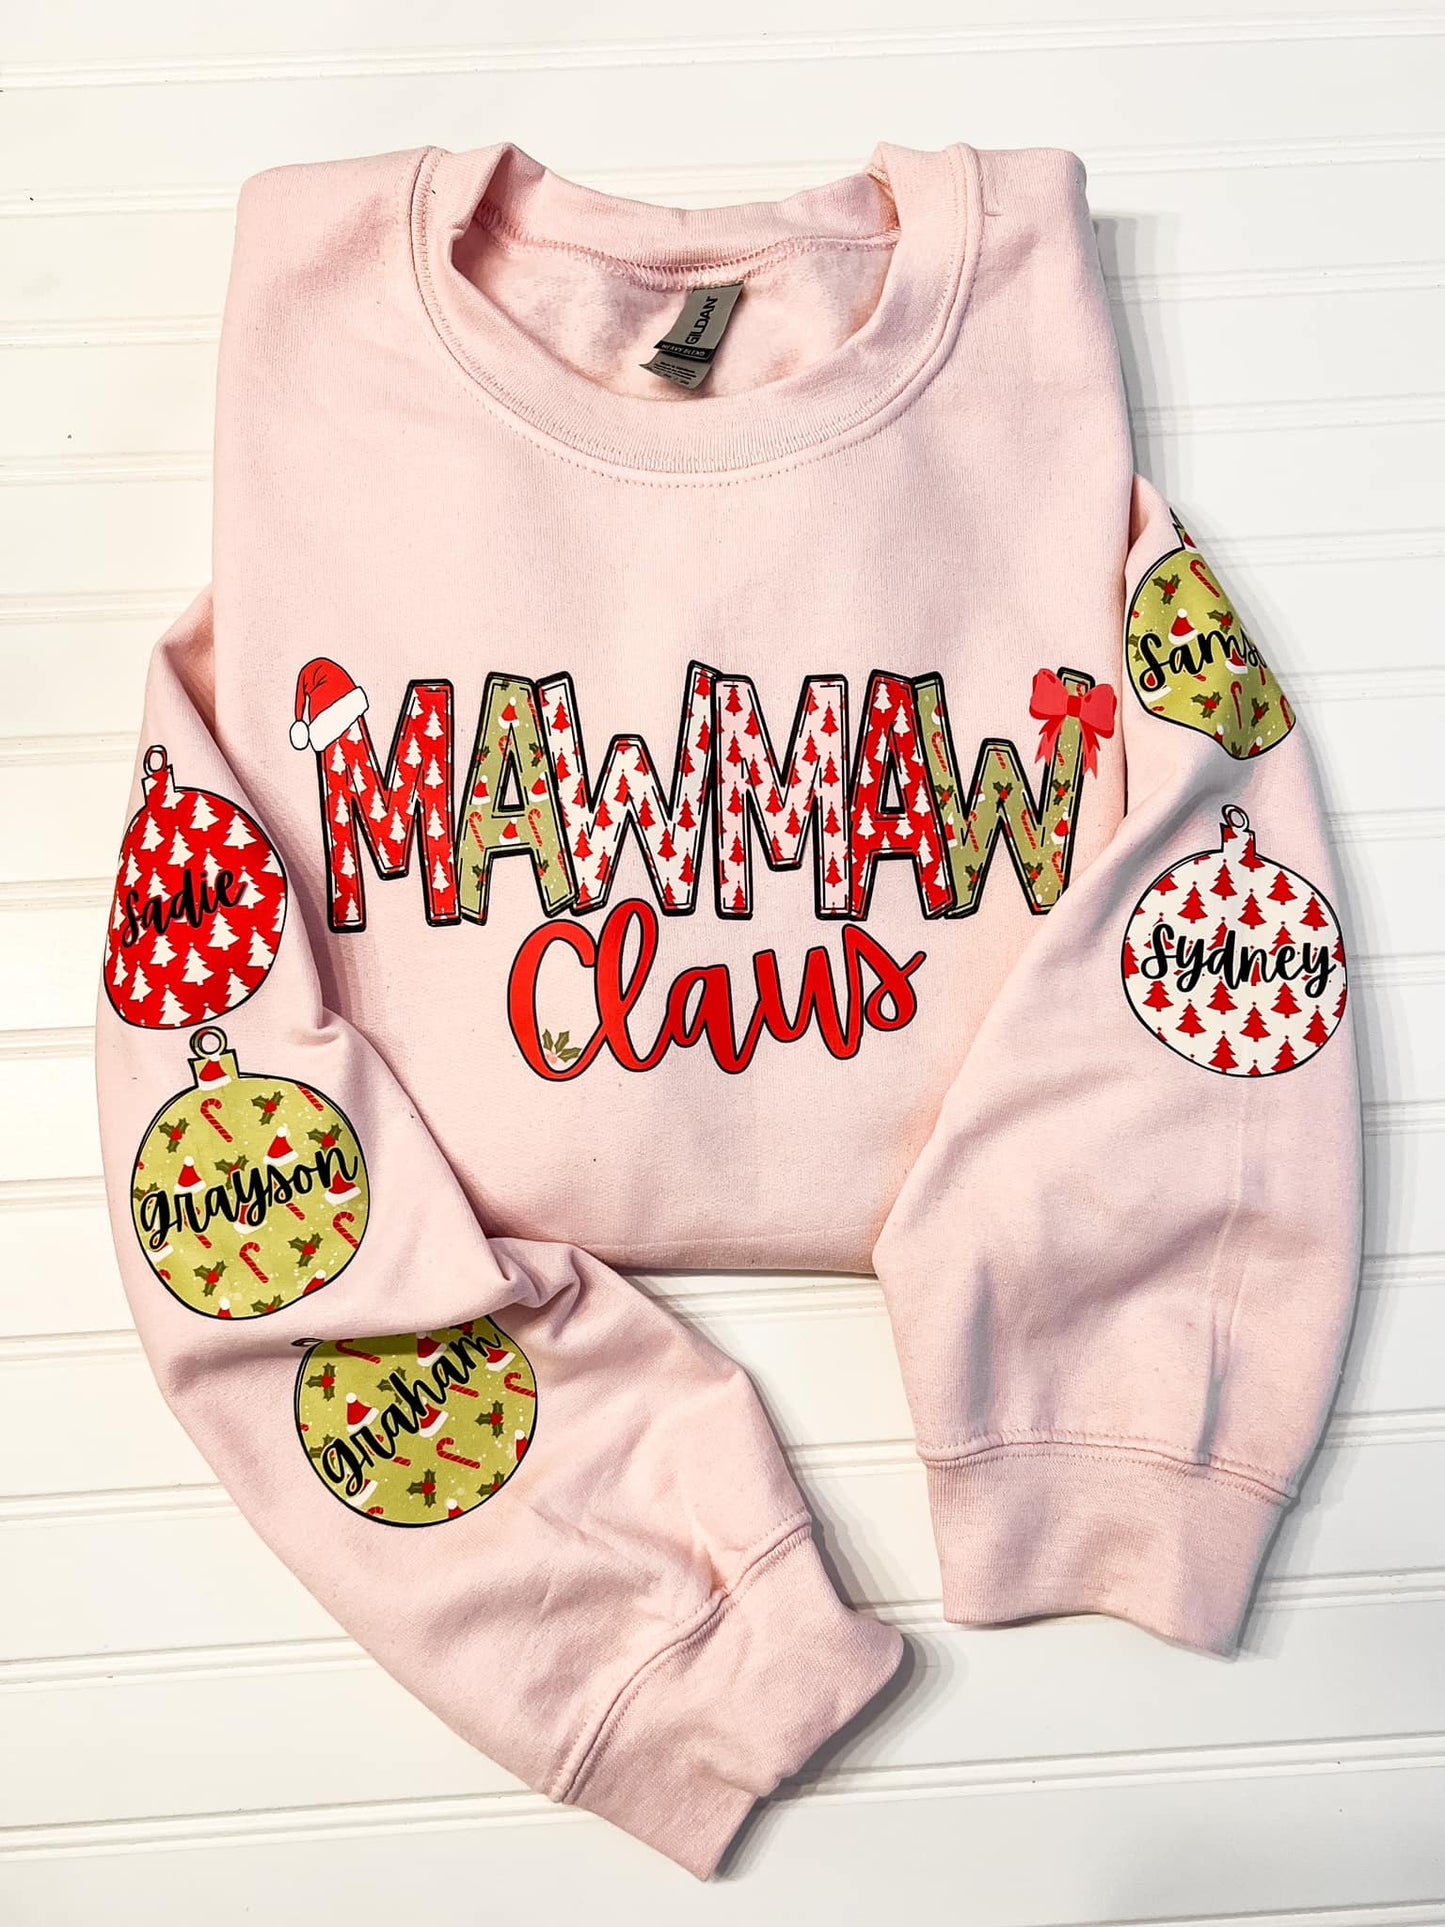 Mawmaw Claus Personalized Shirt, Nana Claus Sweatshirt, Mimi Claus Sweater, Mama Claus tshirt, Christmas Sweater for Her, Names On Sleeves